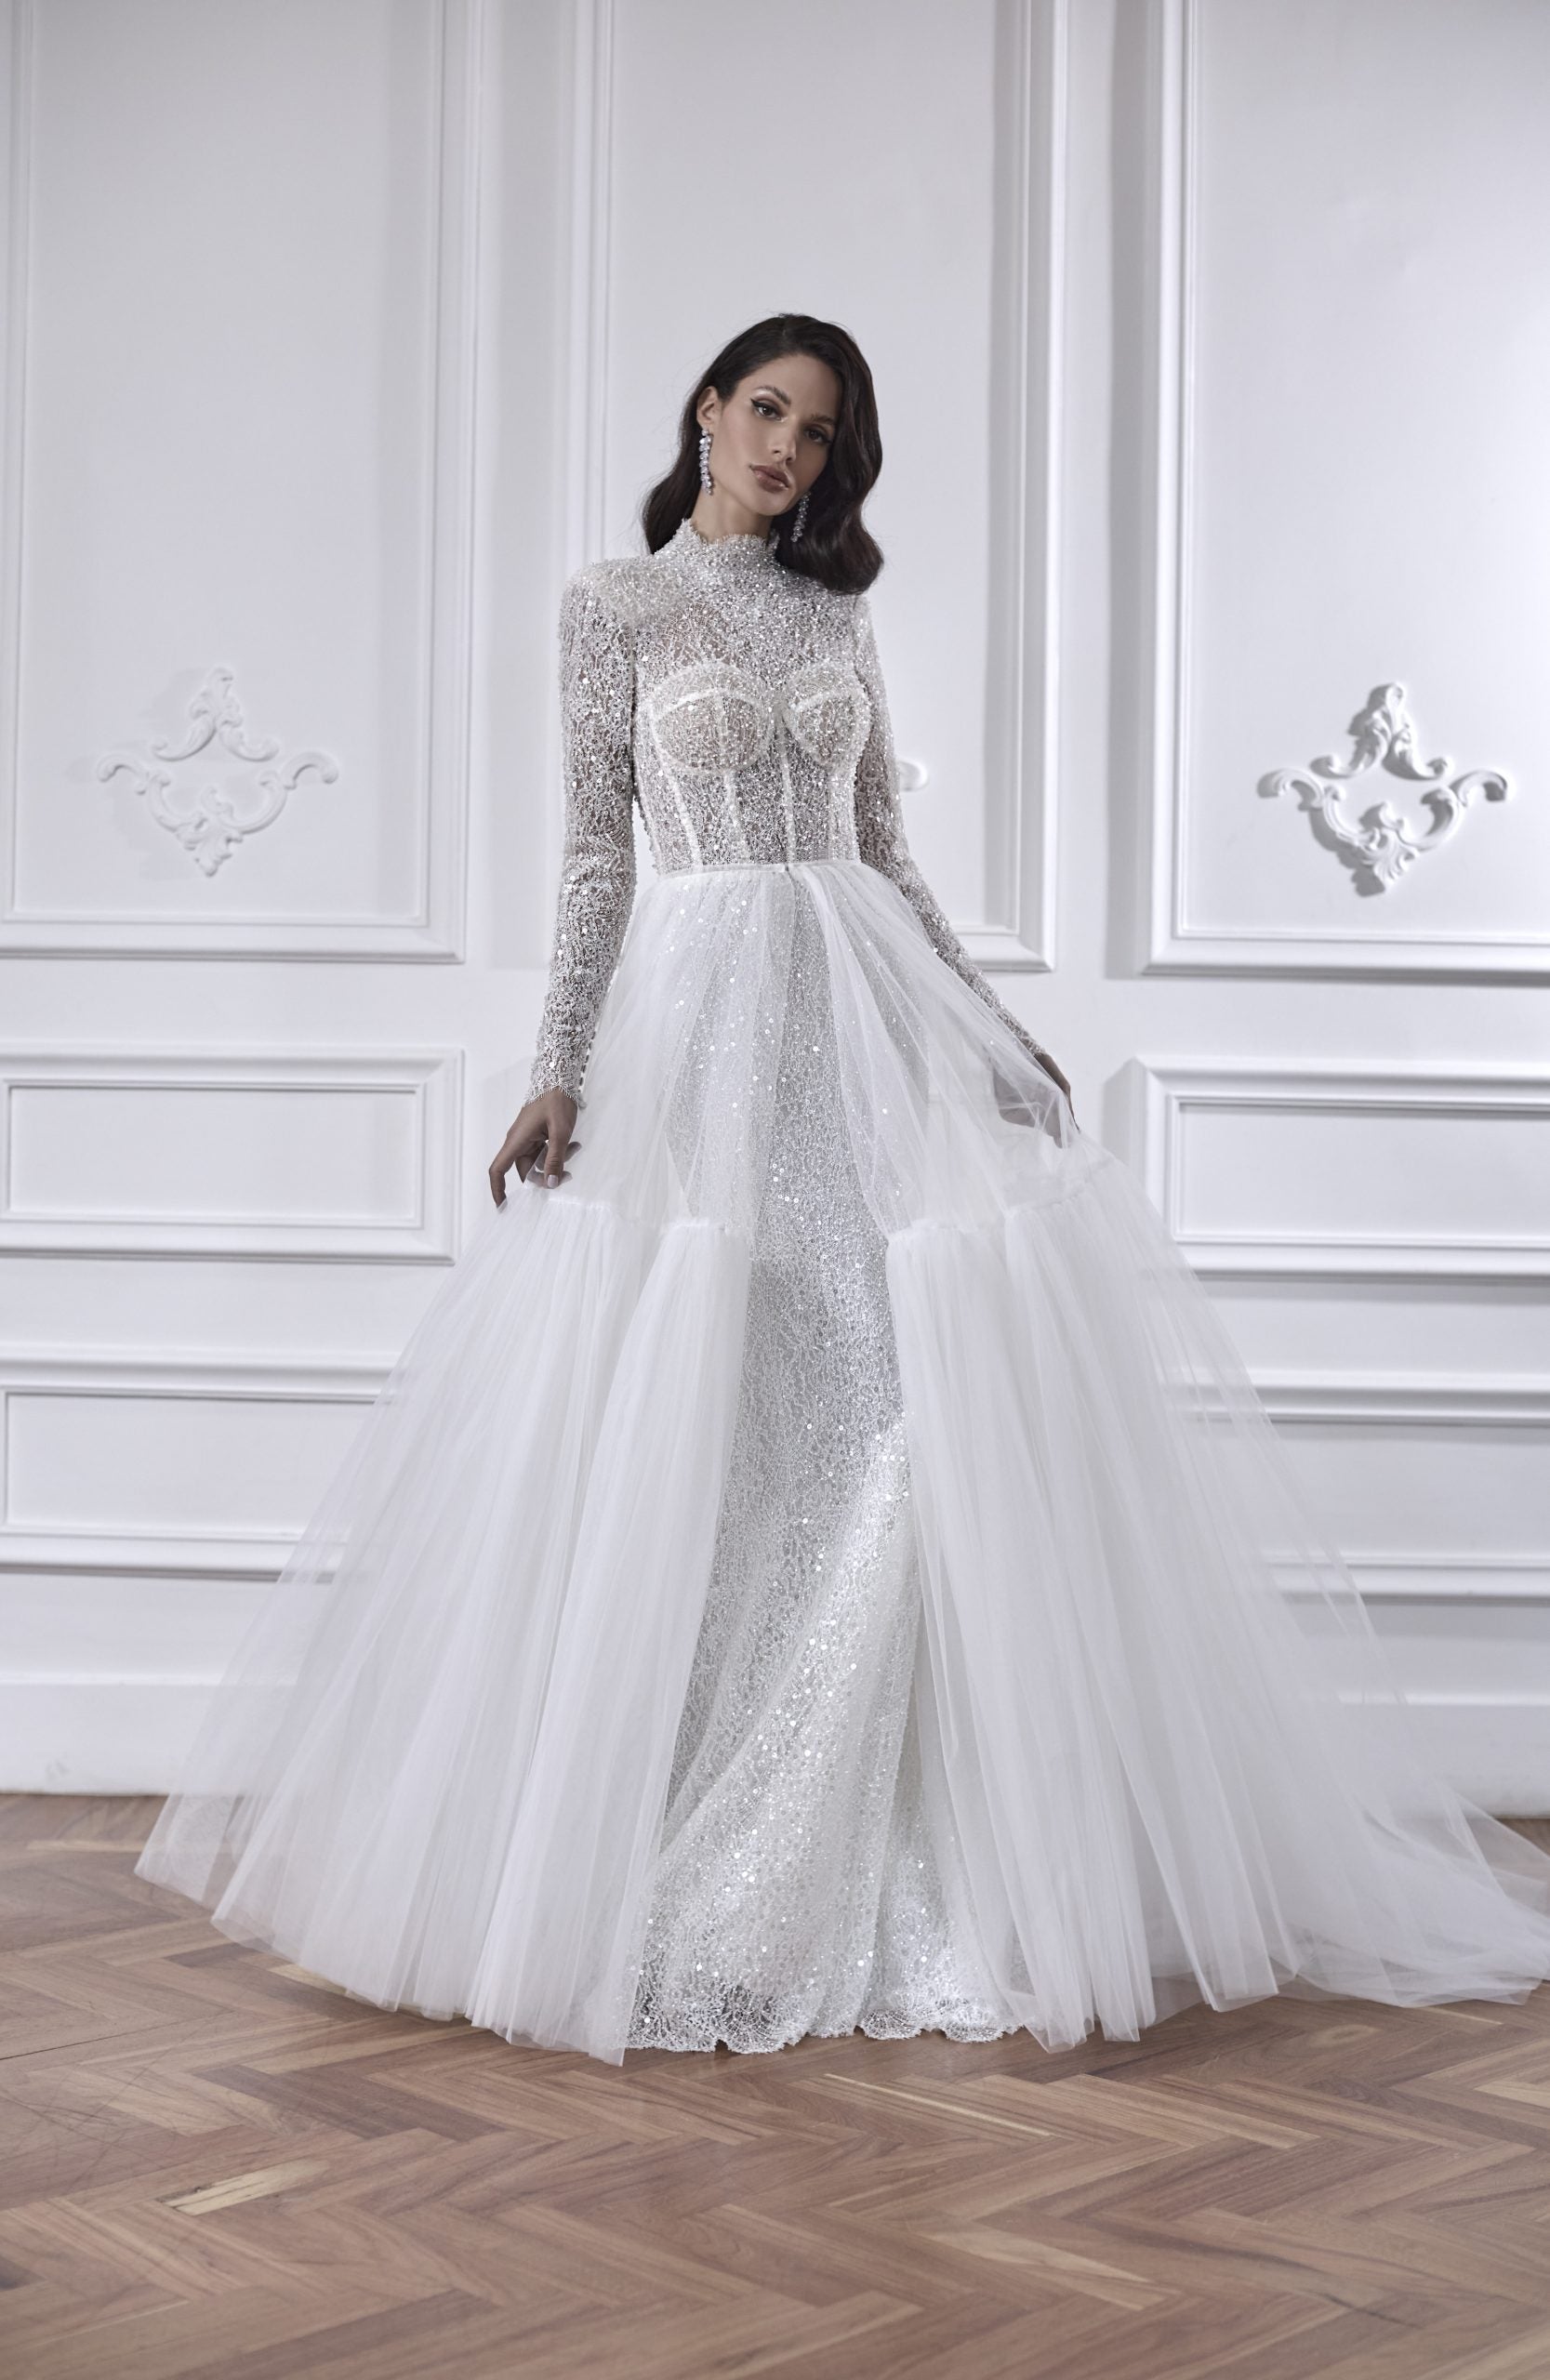 Long Sleeve Fit And Flare Wedding Dress With Detachable Overskirt by Maison Signore - Image 1